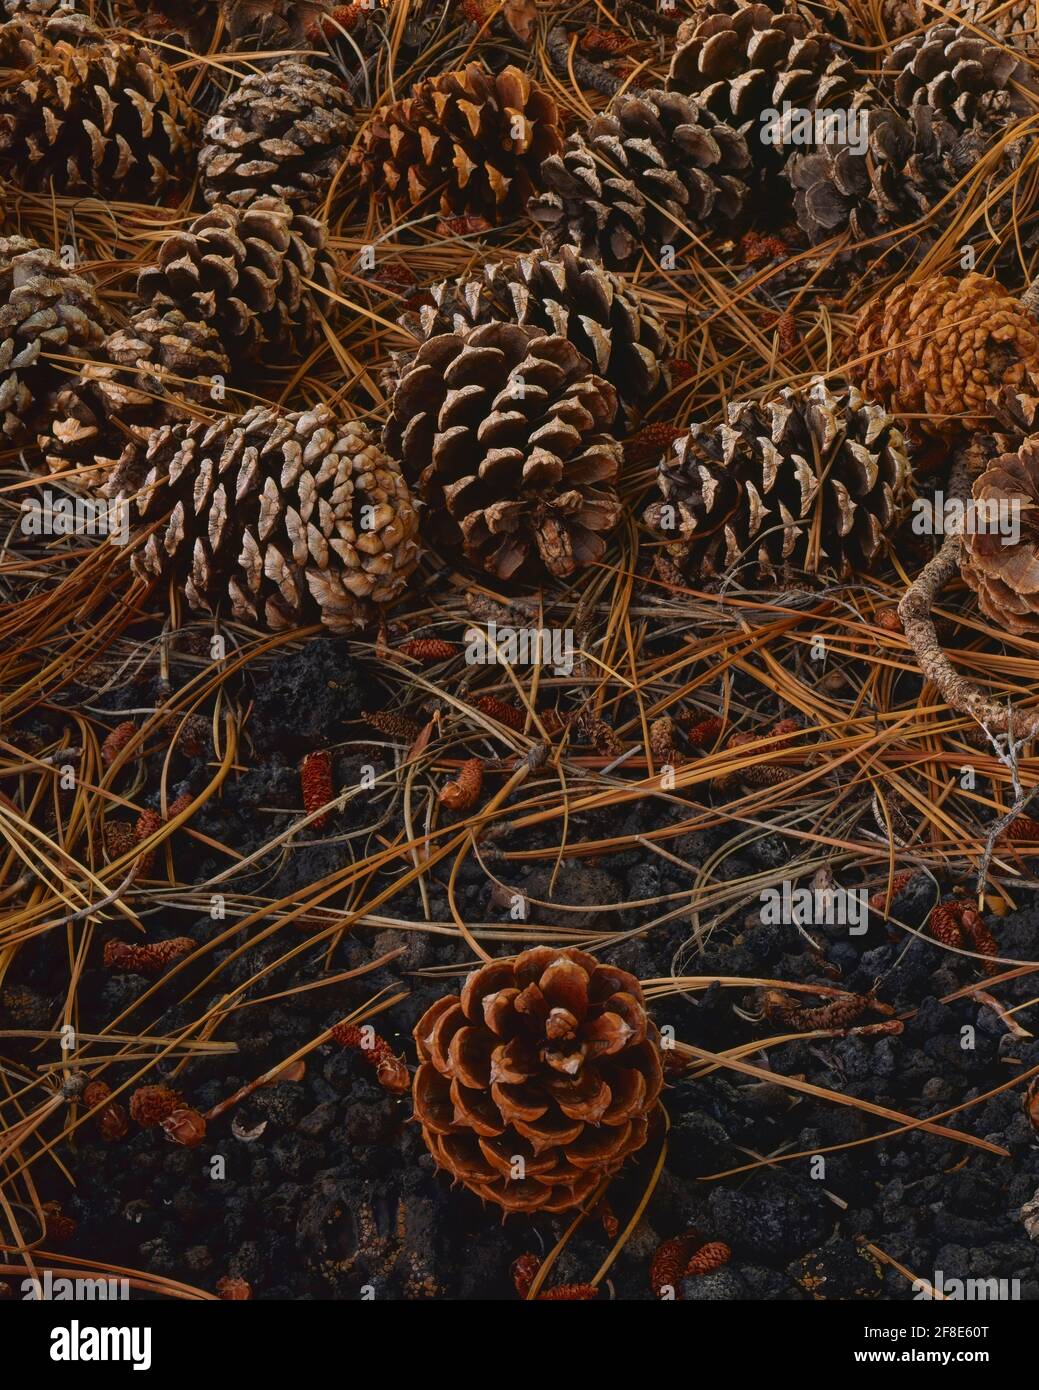 Sunset Crater National Monument  AZ / SEPT Ponderosa pinecones on a bed of needles and volcanic cinder. Stock Photo